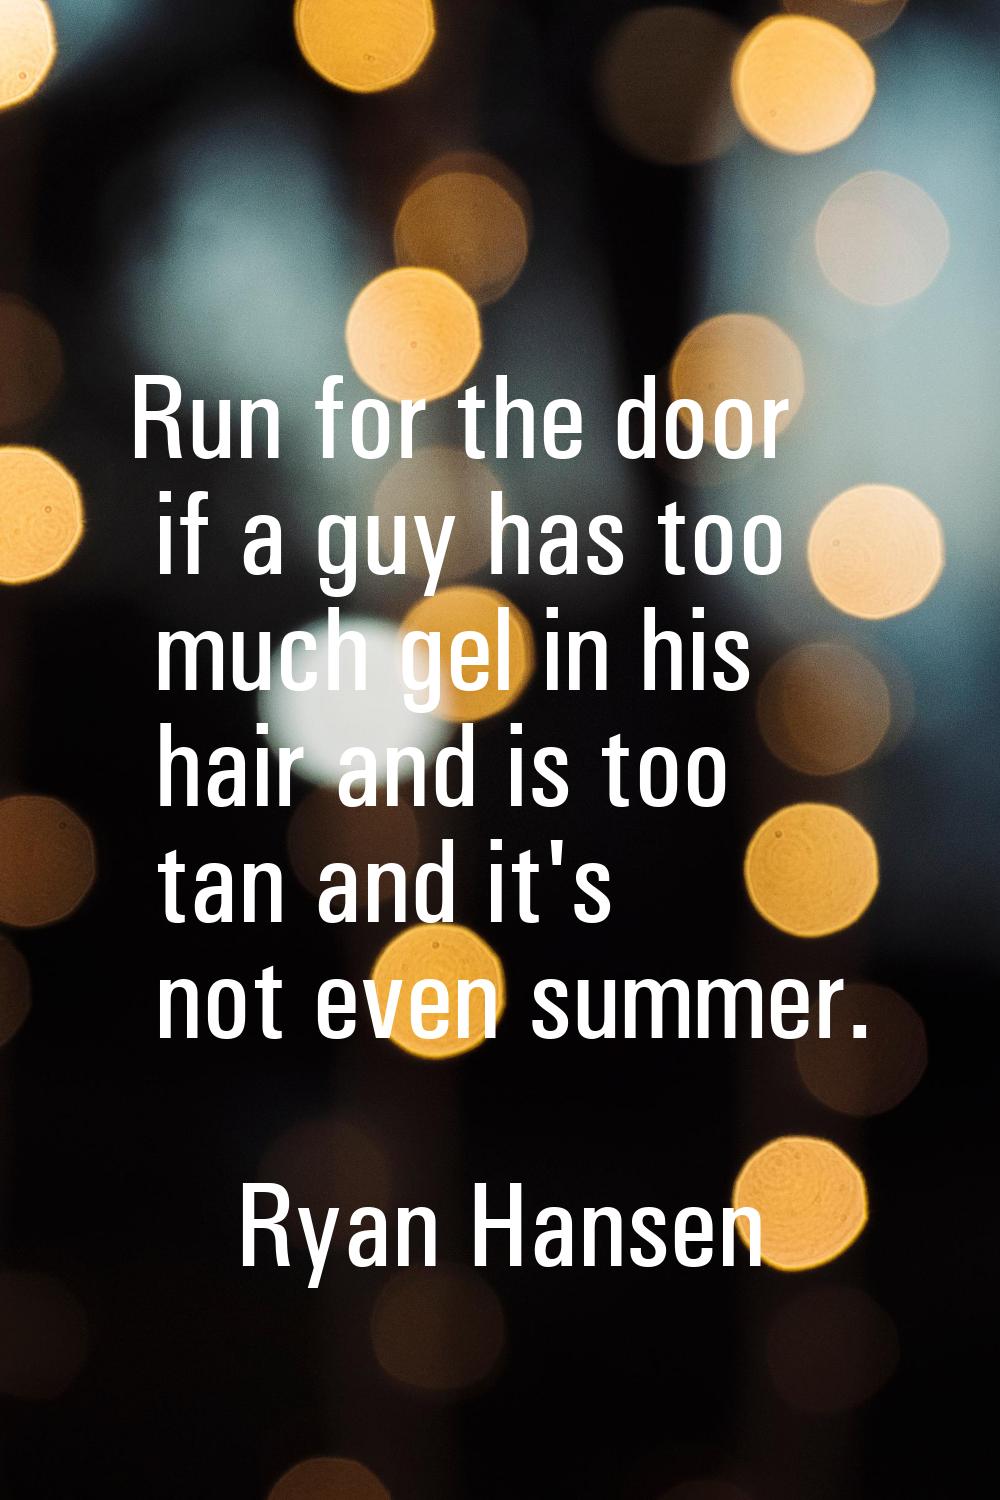 Run for the door if a guy has too much gel in his hair and is too tan and it's not even summer.